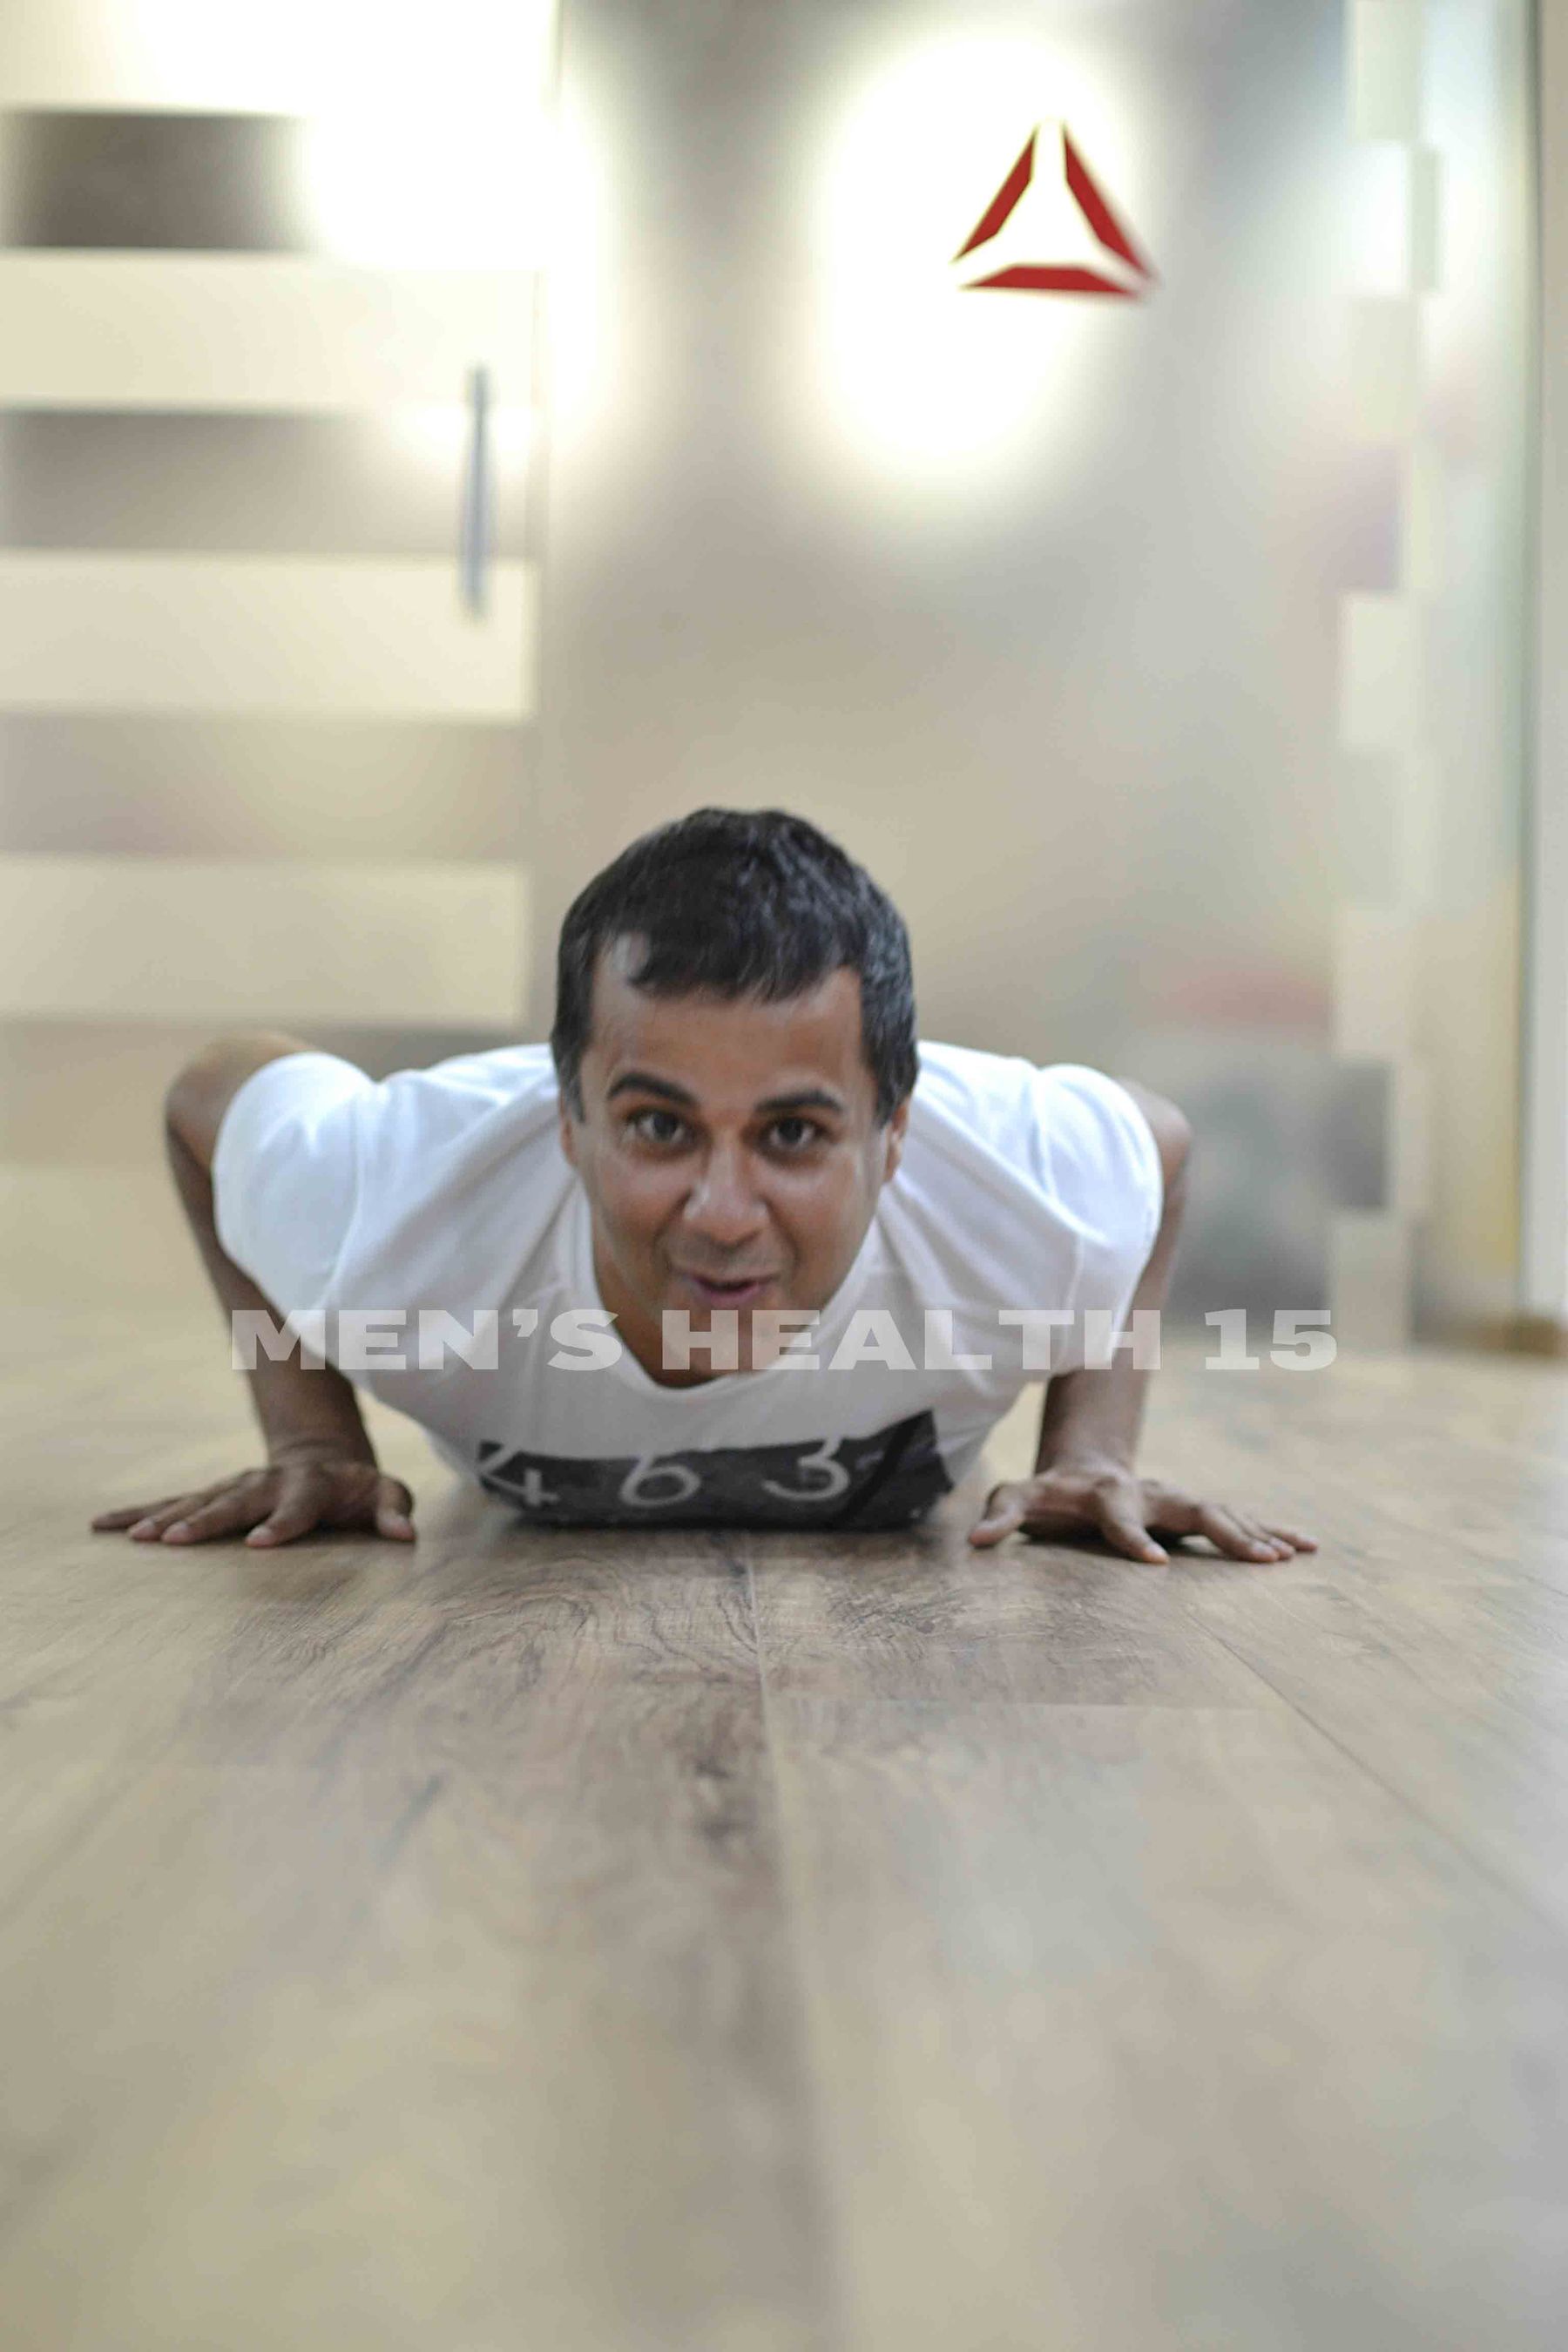 Best-selling author Chetan Bhagat takes on a fitness challenge (PRNewsFoto/India Today Group (Digital))